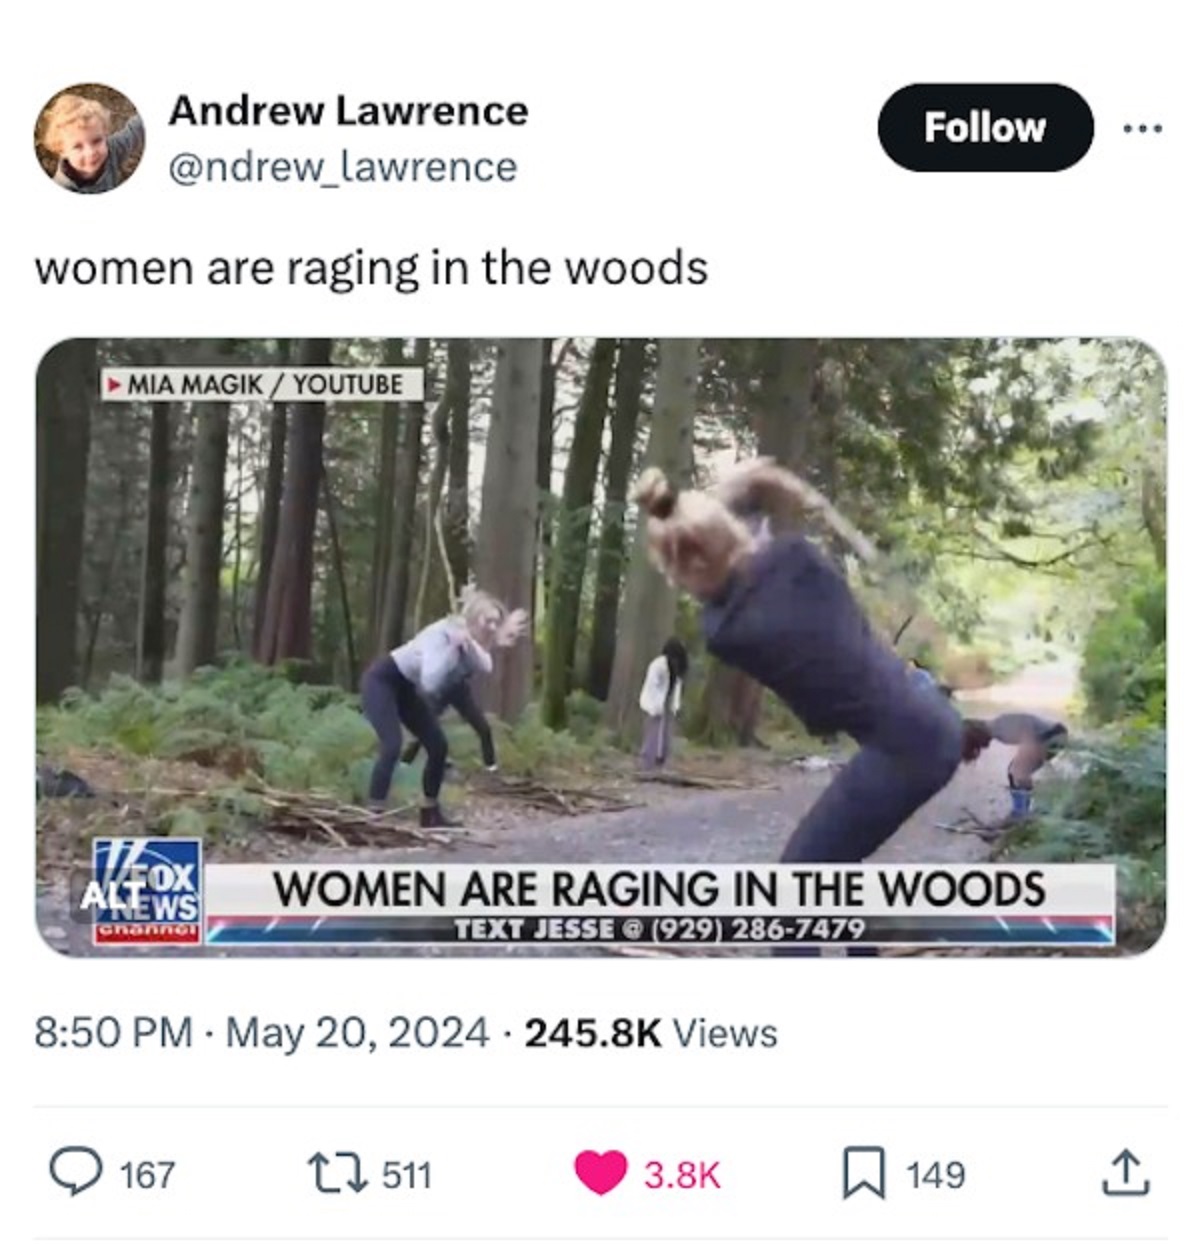 screenshot - Andrew Lawrence women are raging in the woods. Mia MagikYoutube Fox Alews channe Women Are Raging In The Woods Text Jesse 929 2867479 Views 167 511 149